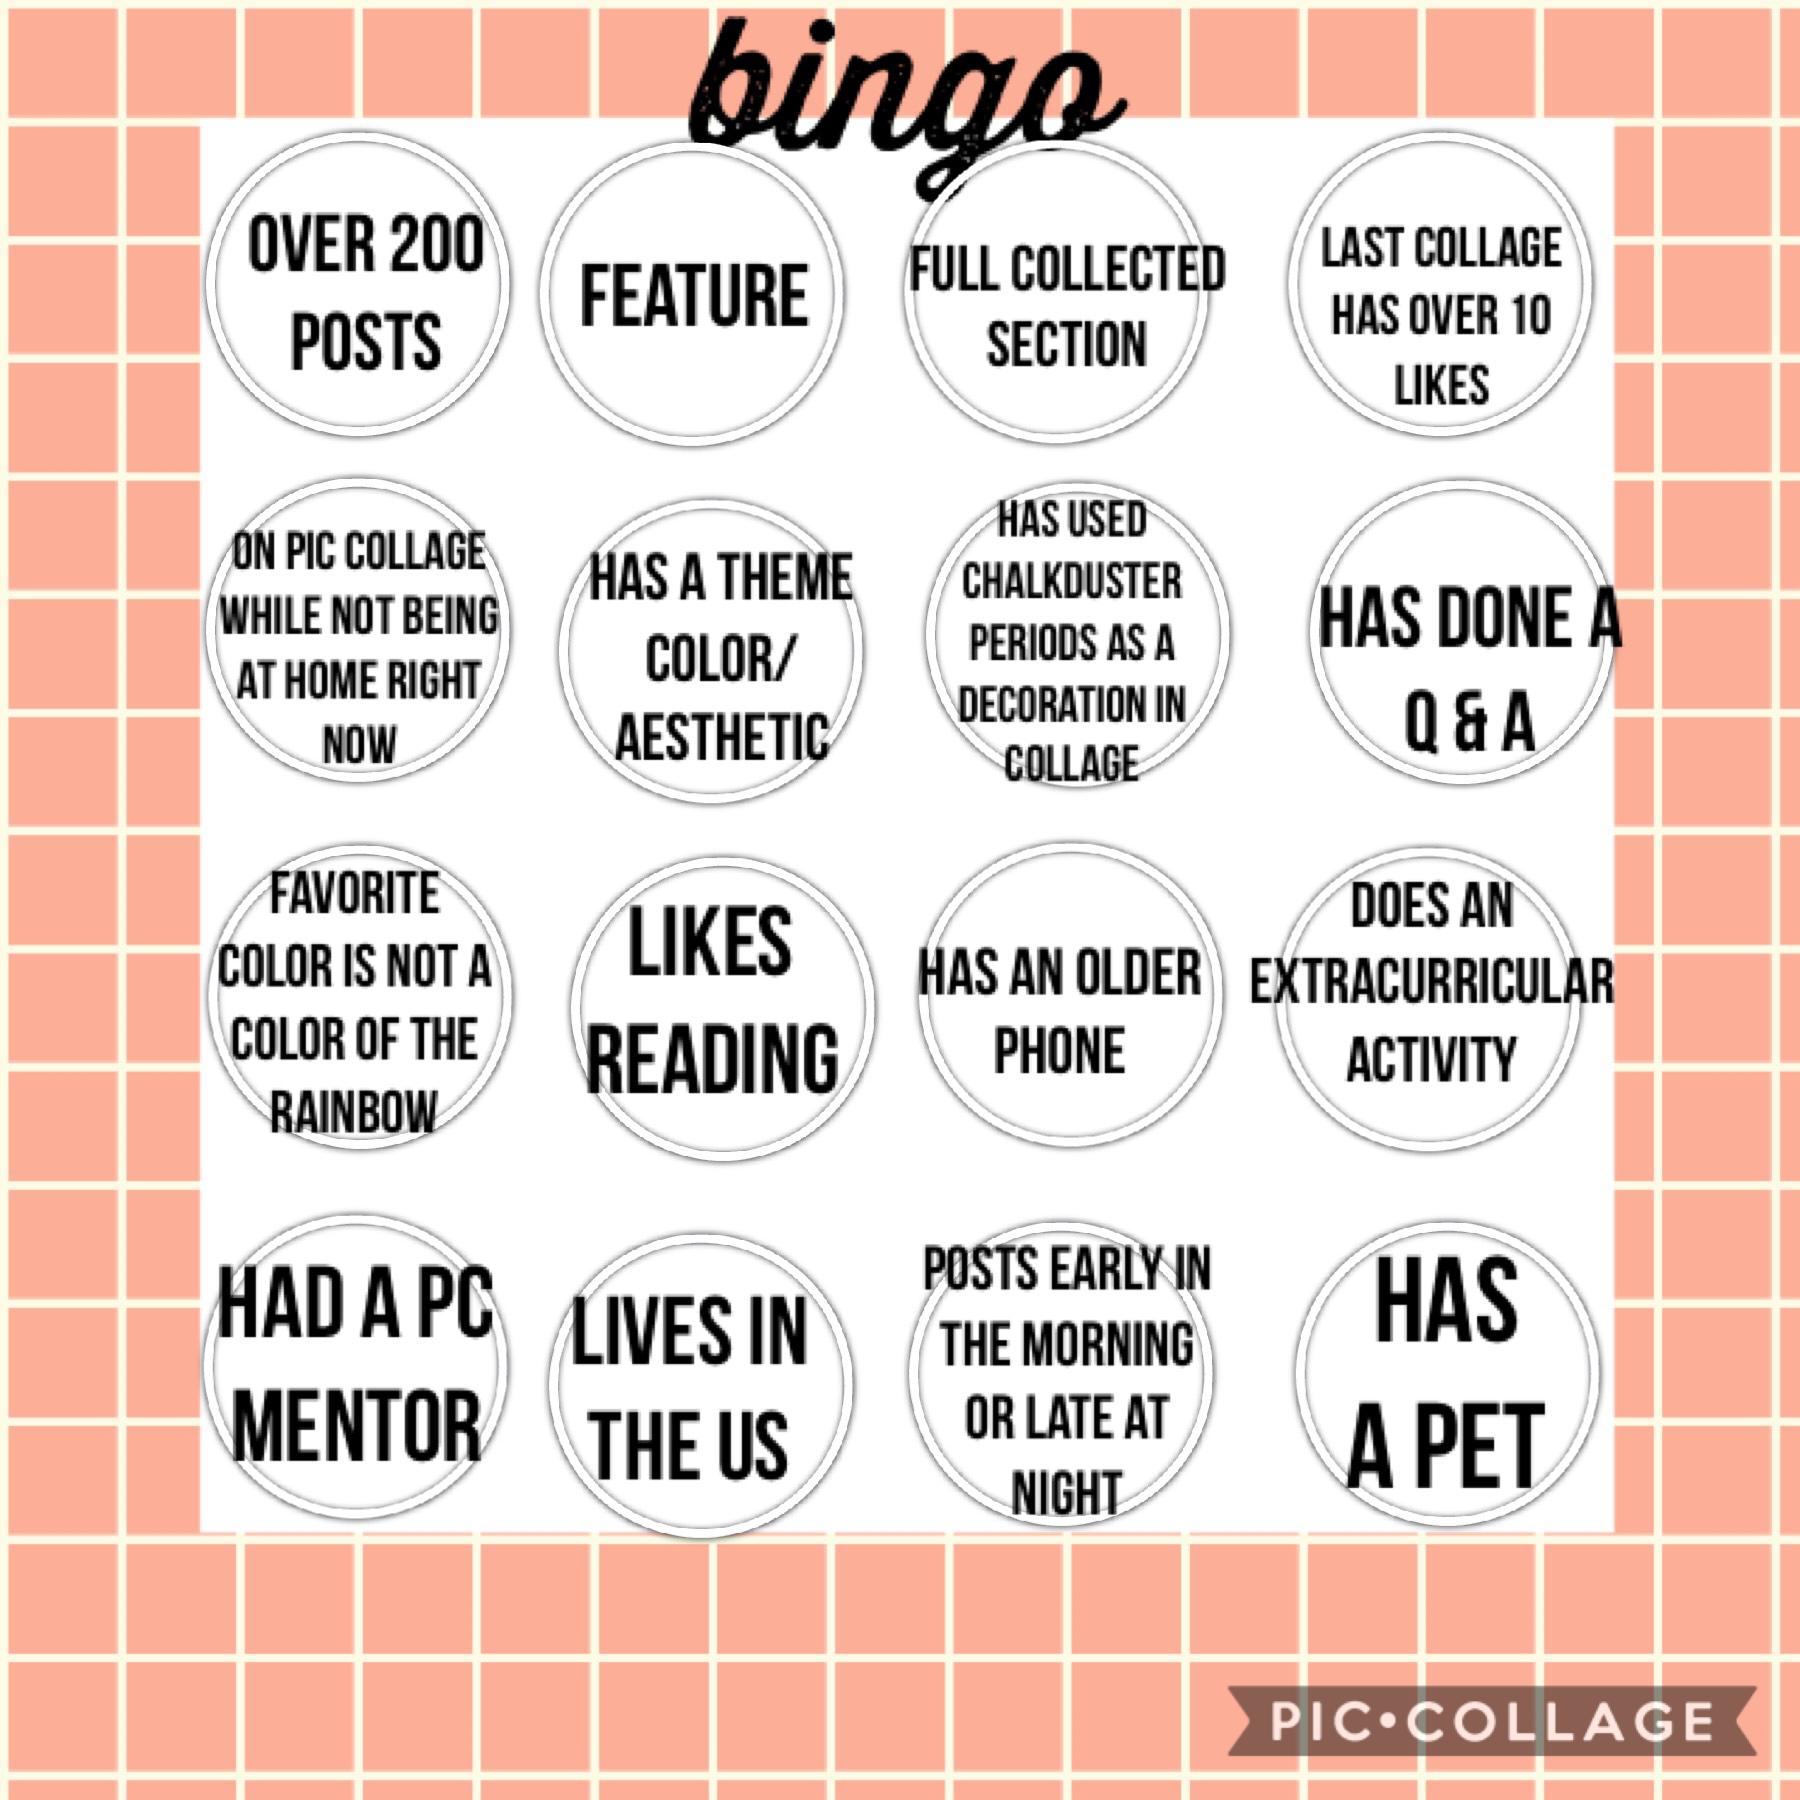 🌿Tap for Instructions 🌿

Cross off all of the things you can, then post in Remixes. If you get a bingo, I will spam you with likes and comments! 😘😂